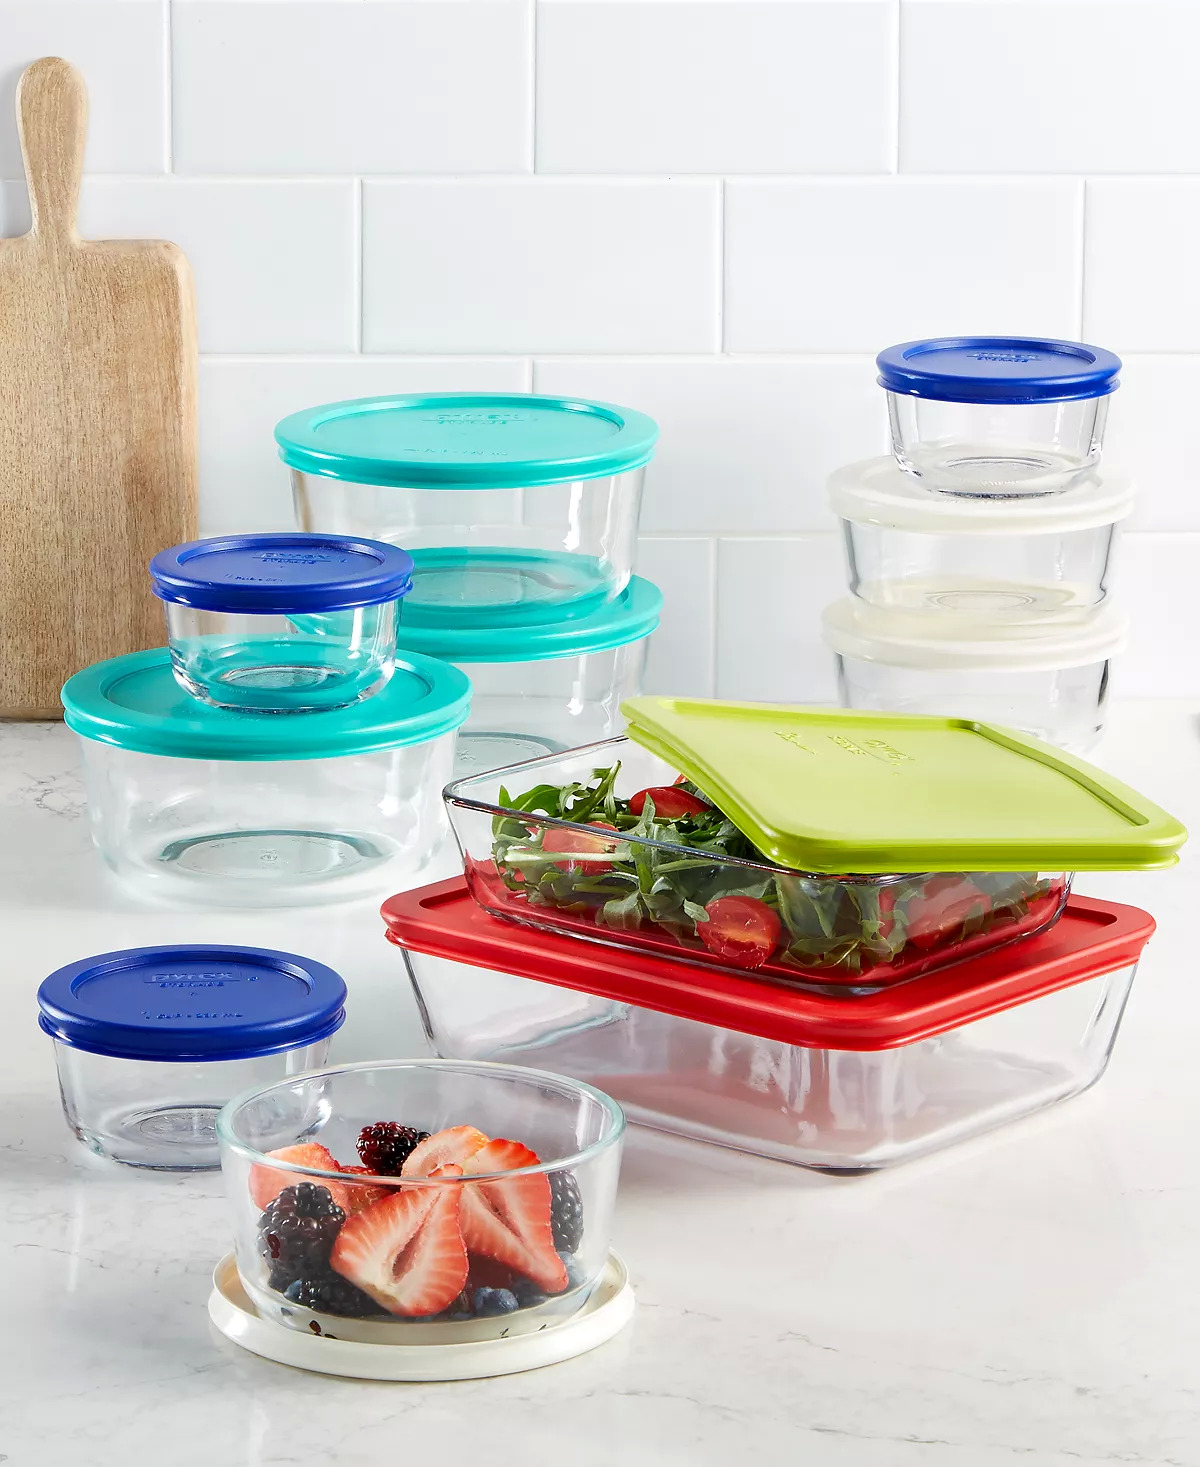 22-Piece Pyrex Food Storage Container Set $29.99 & More + Free Store Pickup at Macy's or F/S on Orders $25+